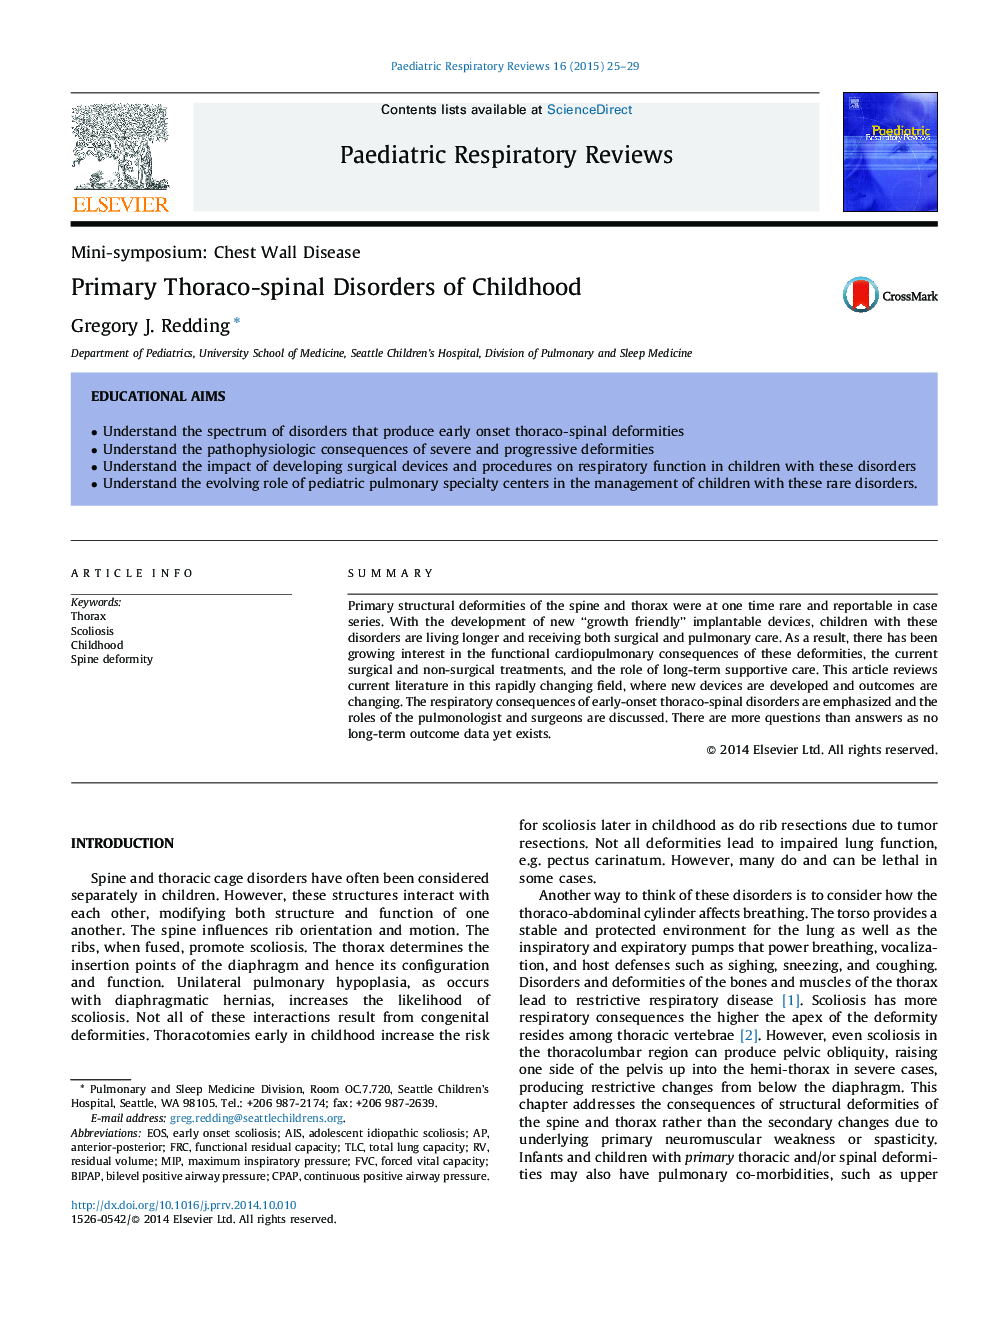 Primary Thoraco-spinal Disorders of Childhood